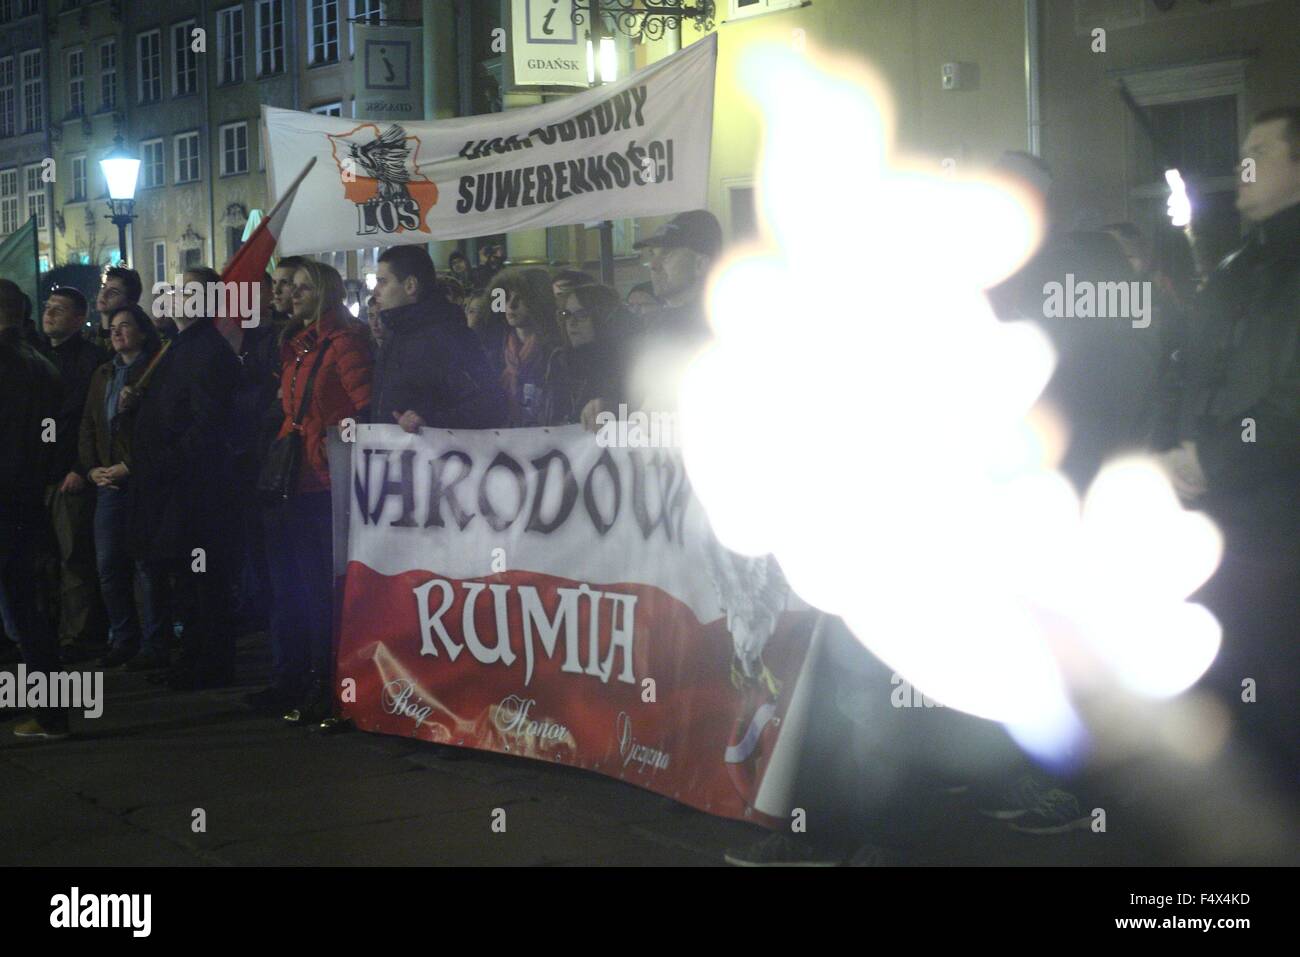 Gdansk, Poland 23rd, Oct. 2015 Anti-immigrants and anti-muslims march held in Gdansk. Far right activists from ONR and Mlodziez Wszechpolska organisations screamed racist slogans, and hold torches Credit:  Michal Fludra/Alamy Live News Stock Photo